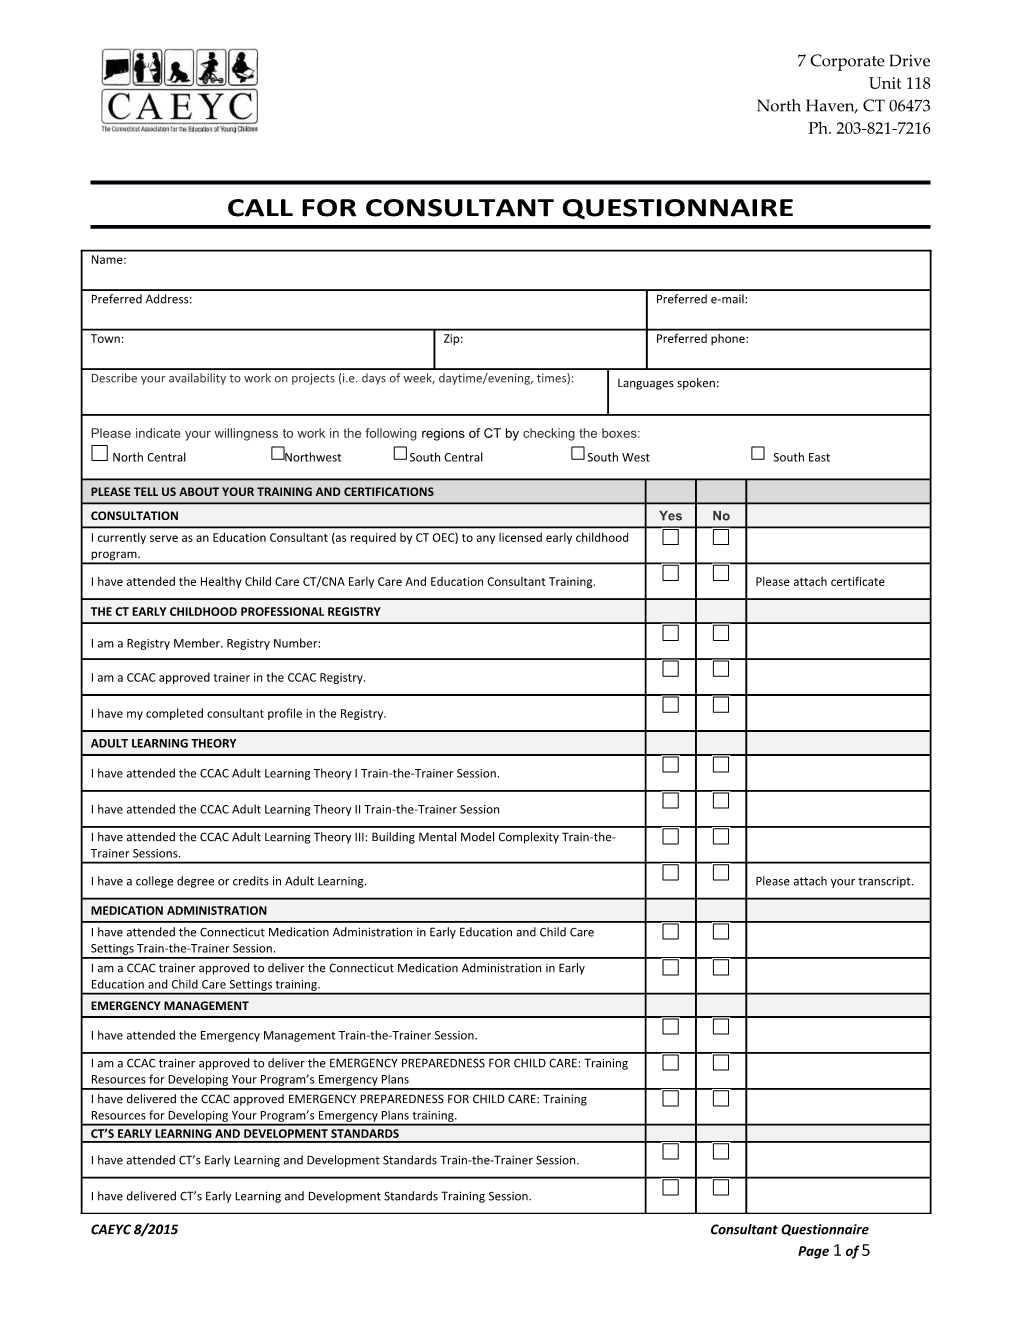 Call for Consultant Questionnaire